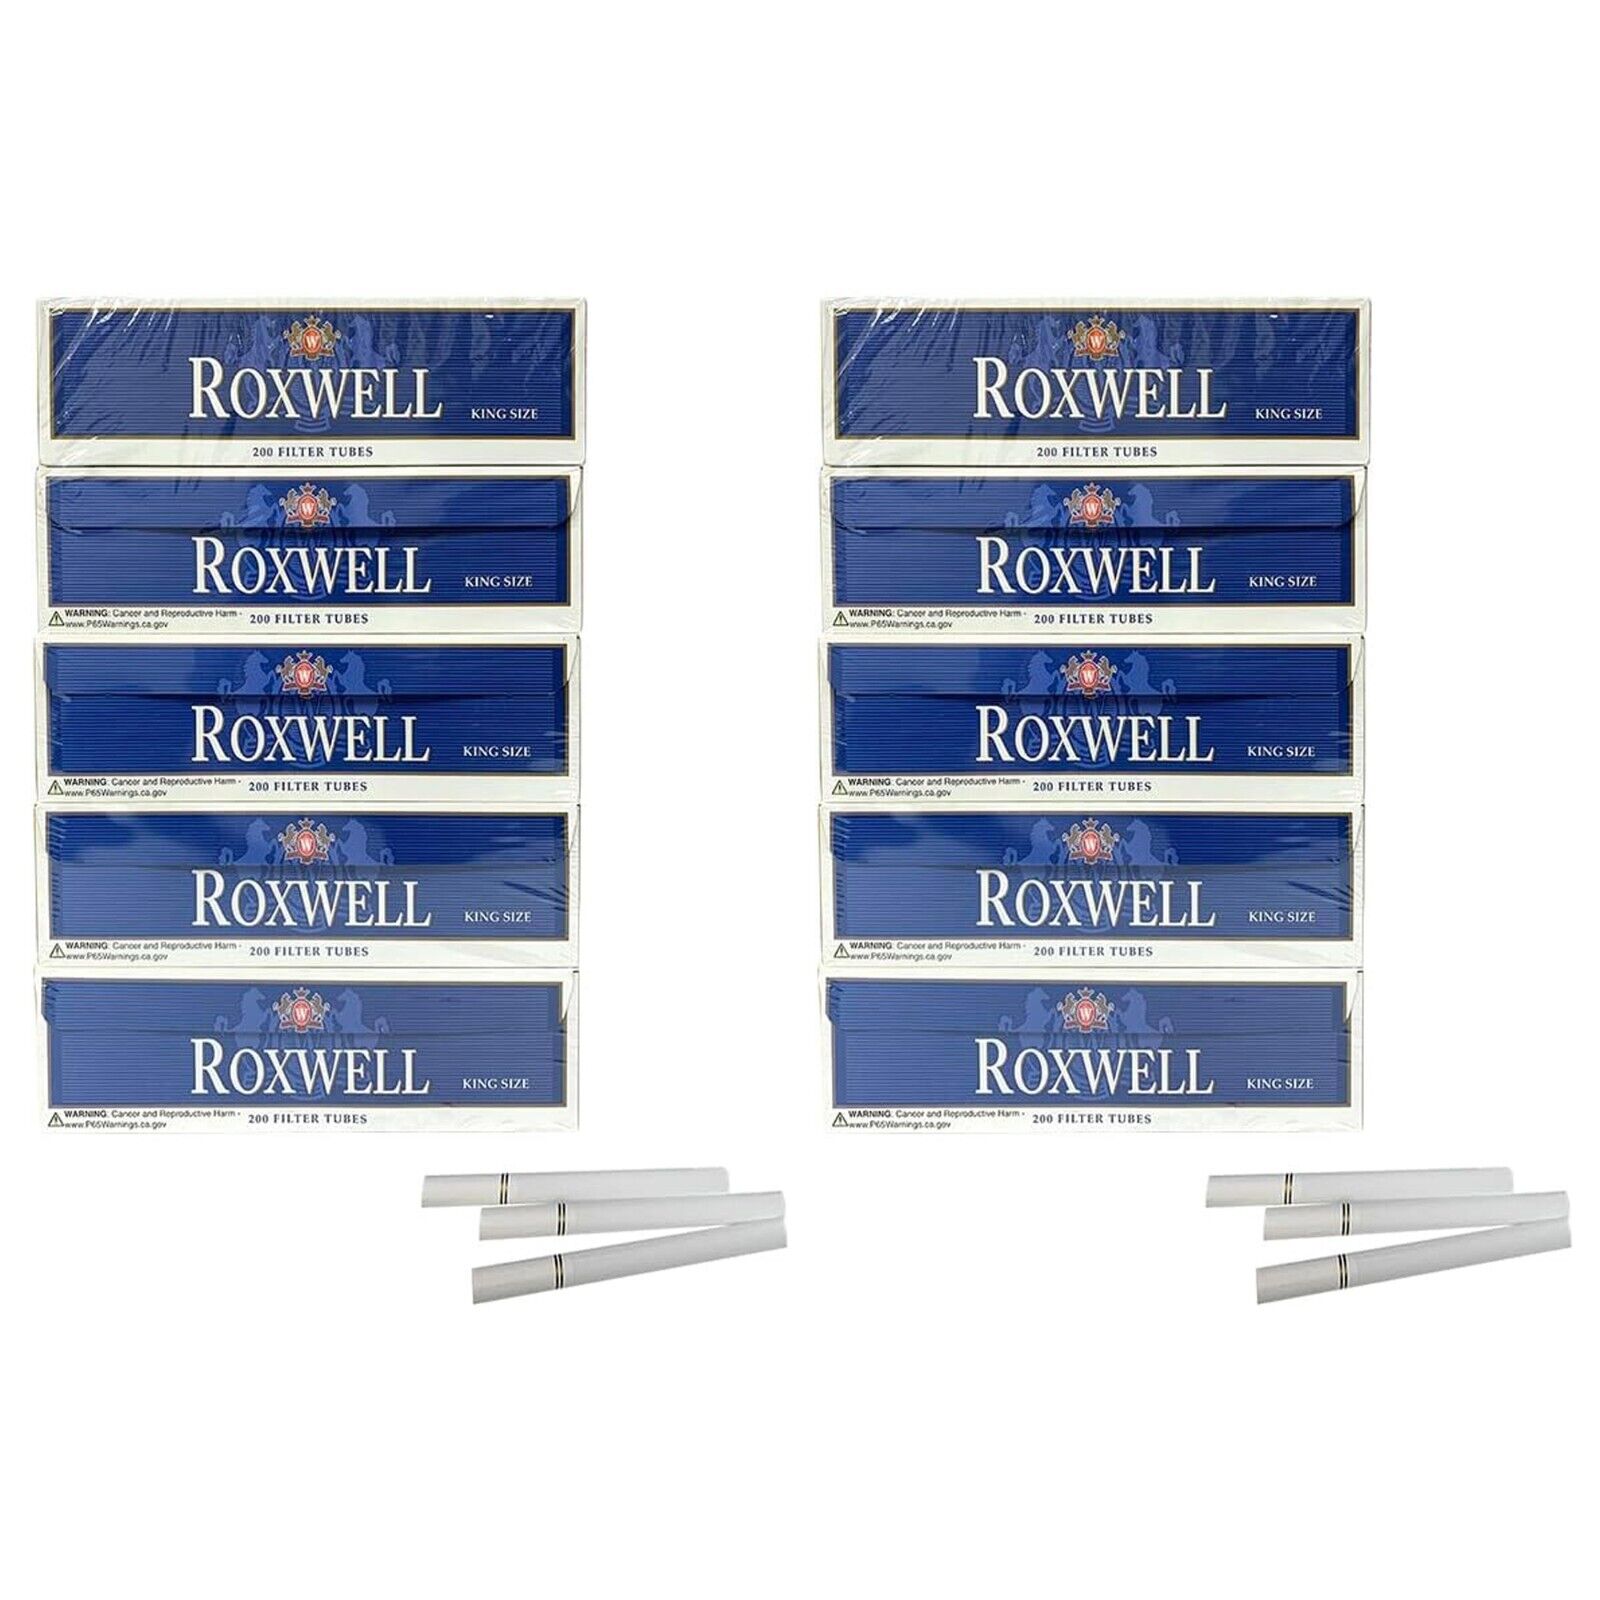 Roxwell Pre Rolled Tubes King Size Blue Cigarette Filter Tubes 200/Pack: 10 Box